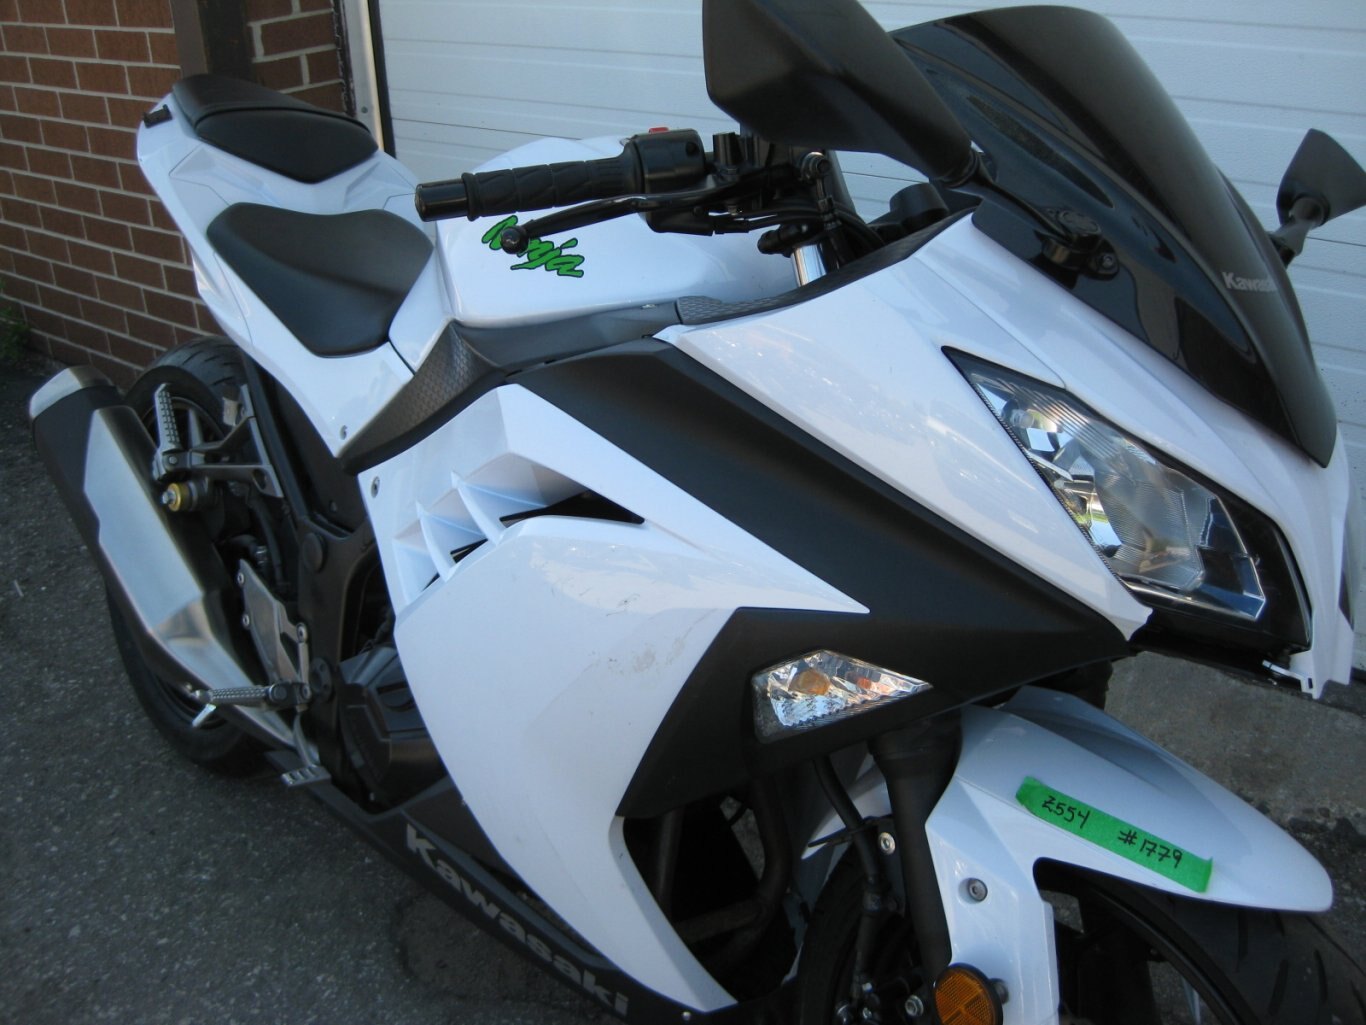 2015 Kawasaki Ninja 300R SOLD CONGRATULATIONS JASON, WELCOME TO THE WORLD OF TWO WHEELED EXCITEMENT!